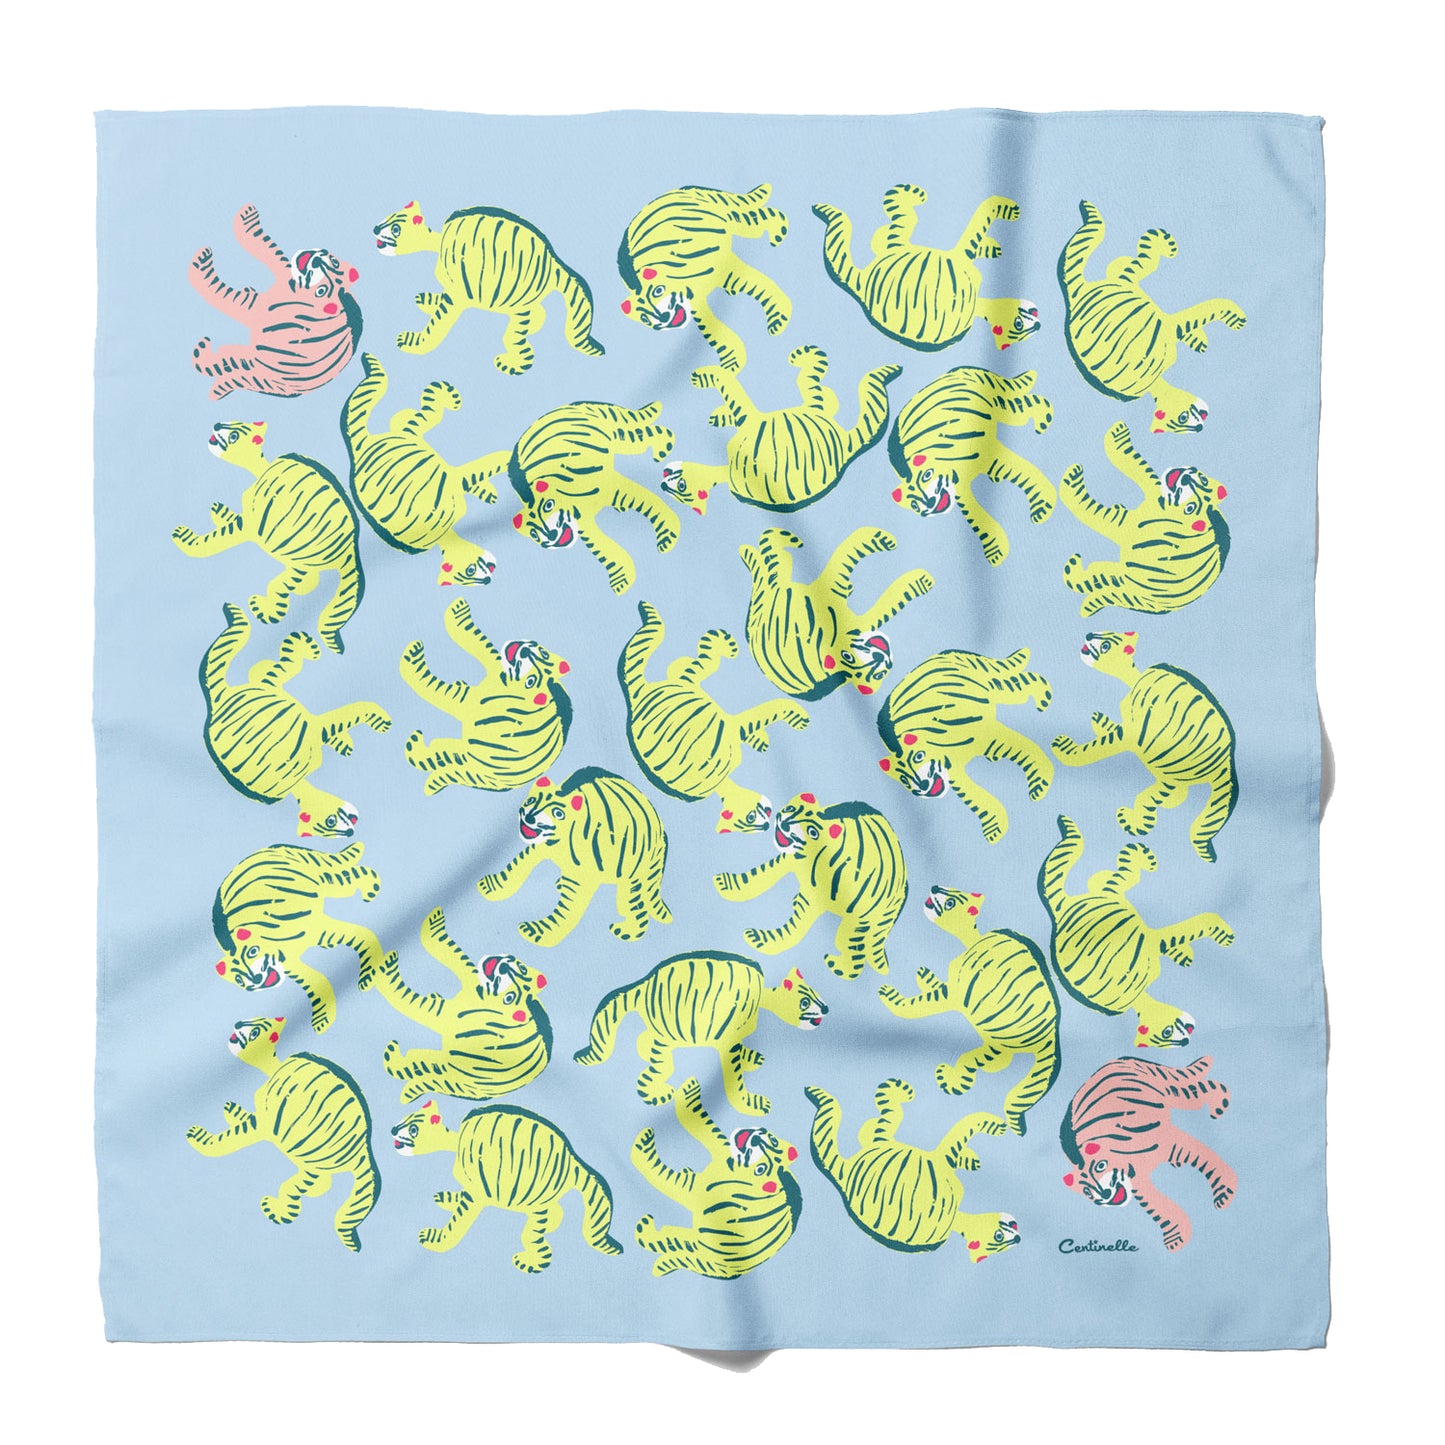 A blue bandana with yellow and green tigers on it.